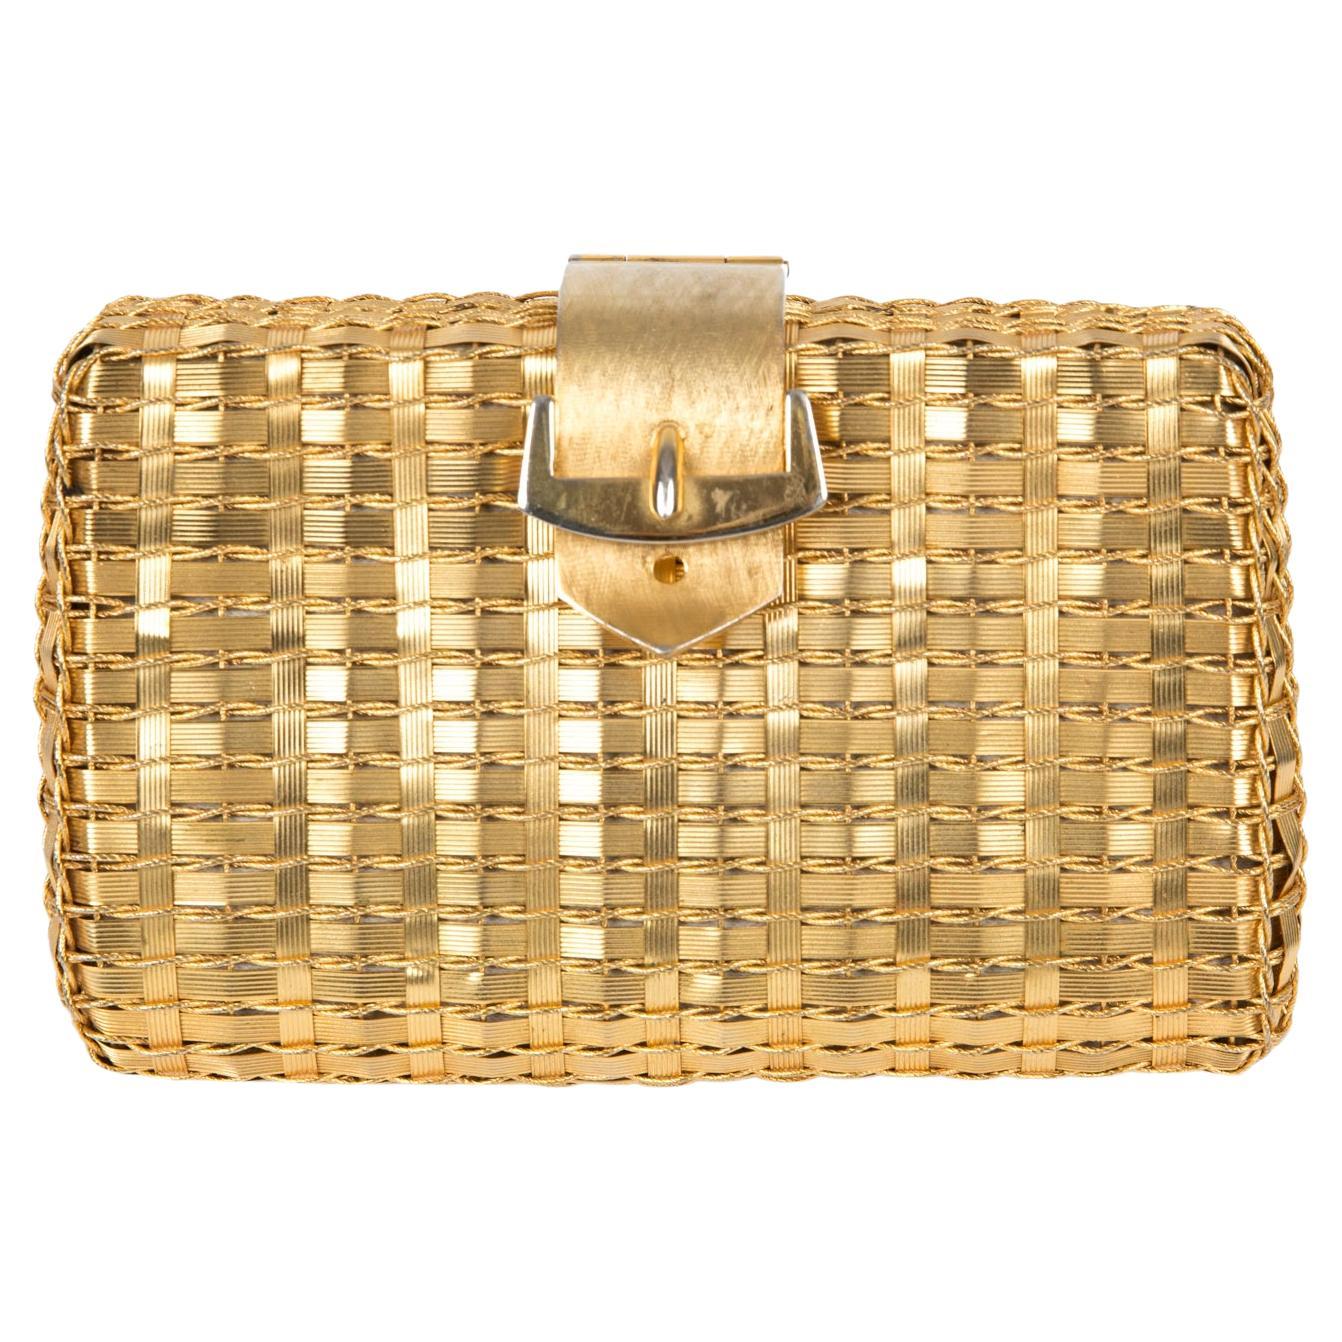 Rodo Gold-Tone Metal Woven Clutch Bag For Sale